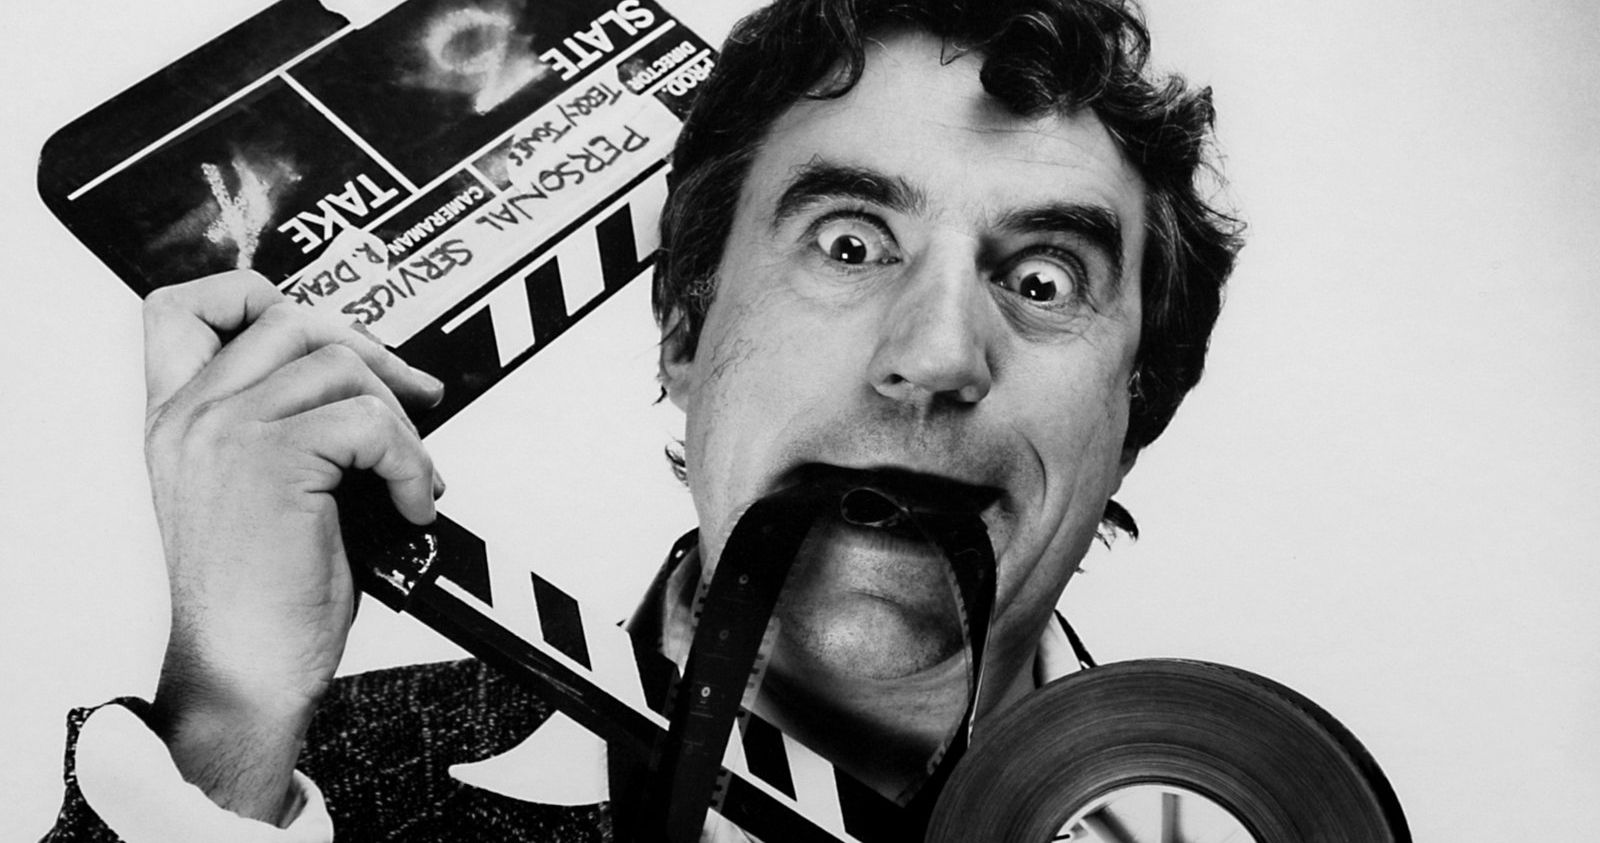 Terry Jones Dies, Monty Python Star and Comedy Pioneer Was 77